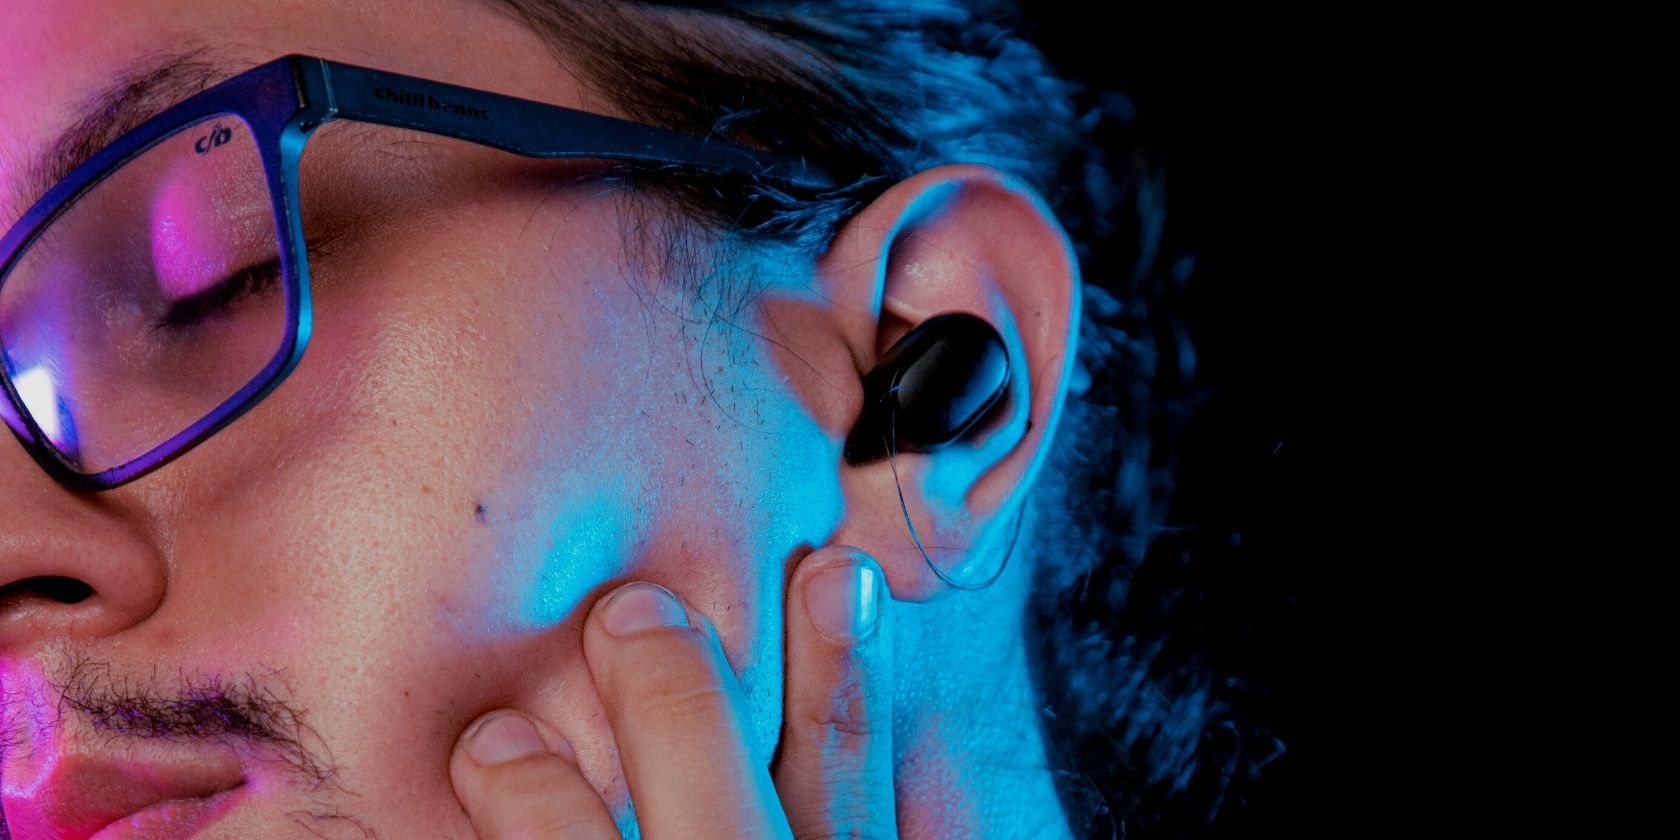 Man wearing glasses sleeping with earbuds on